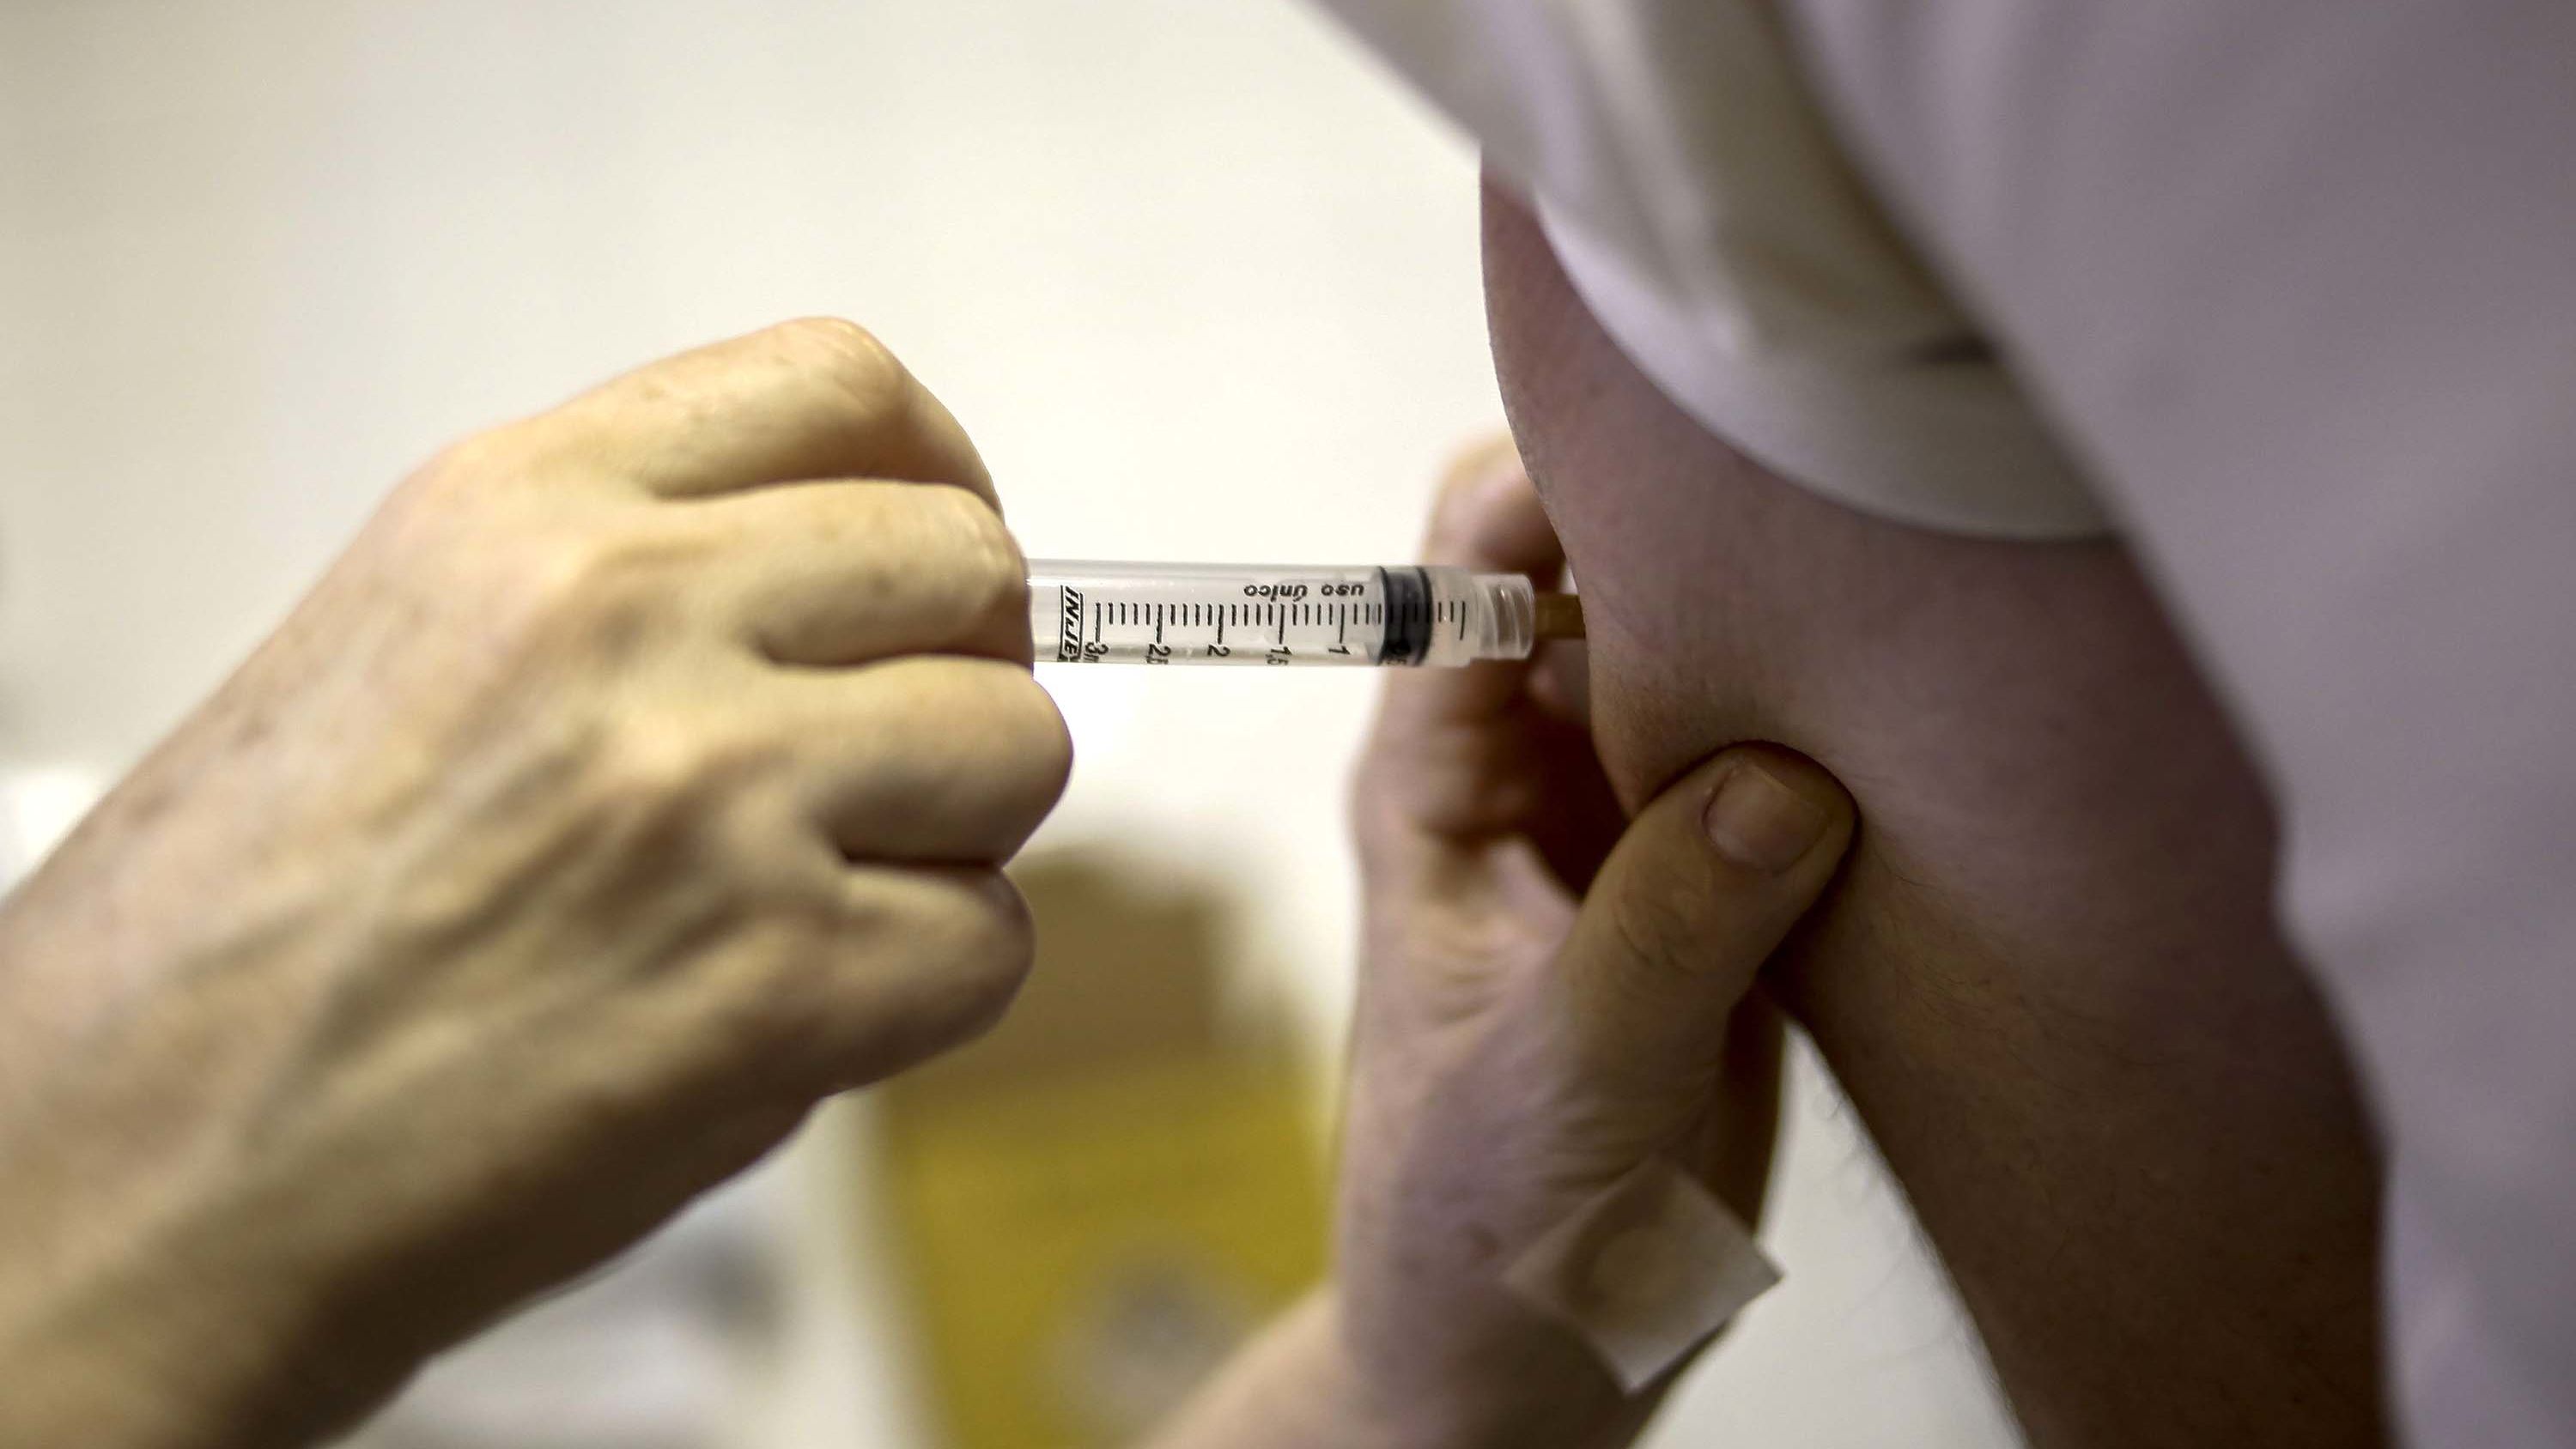 A woman receives a yellow fever vaccination at an outpatient clinic in Sao Paulo, Brazil.